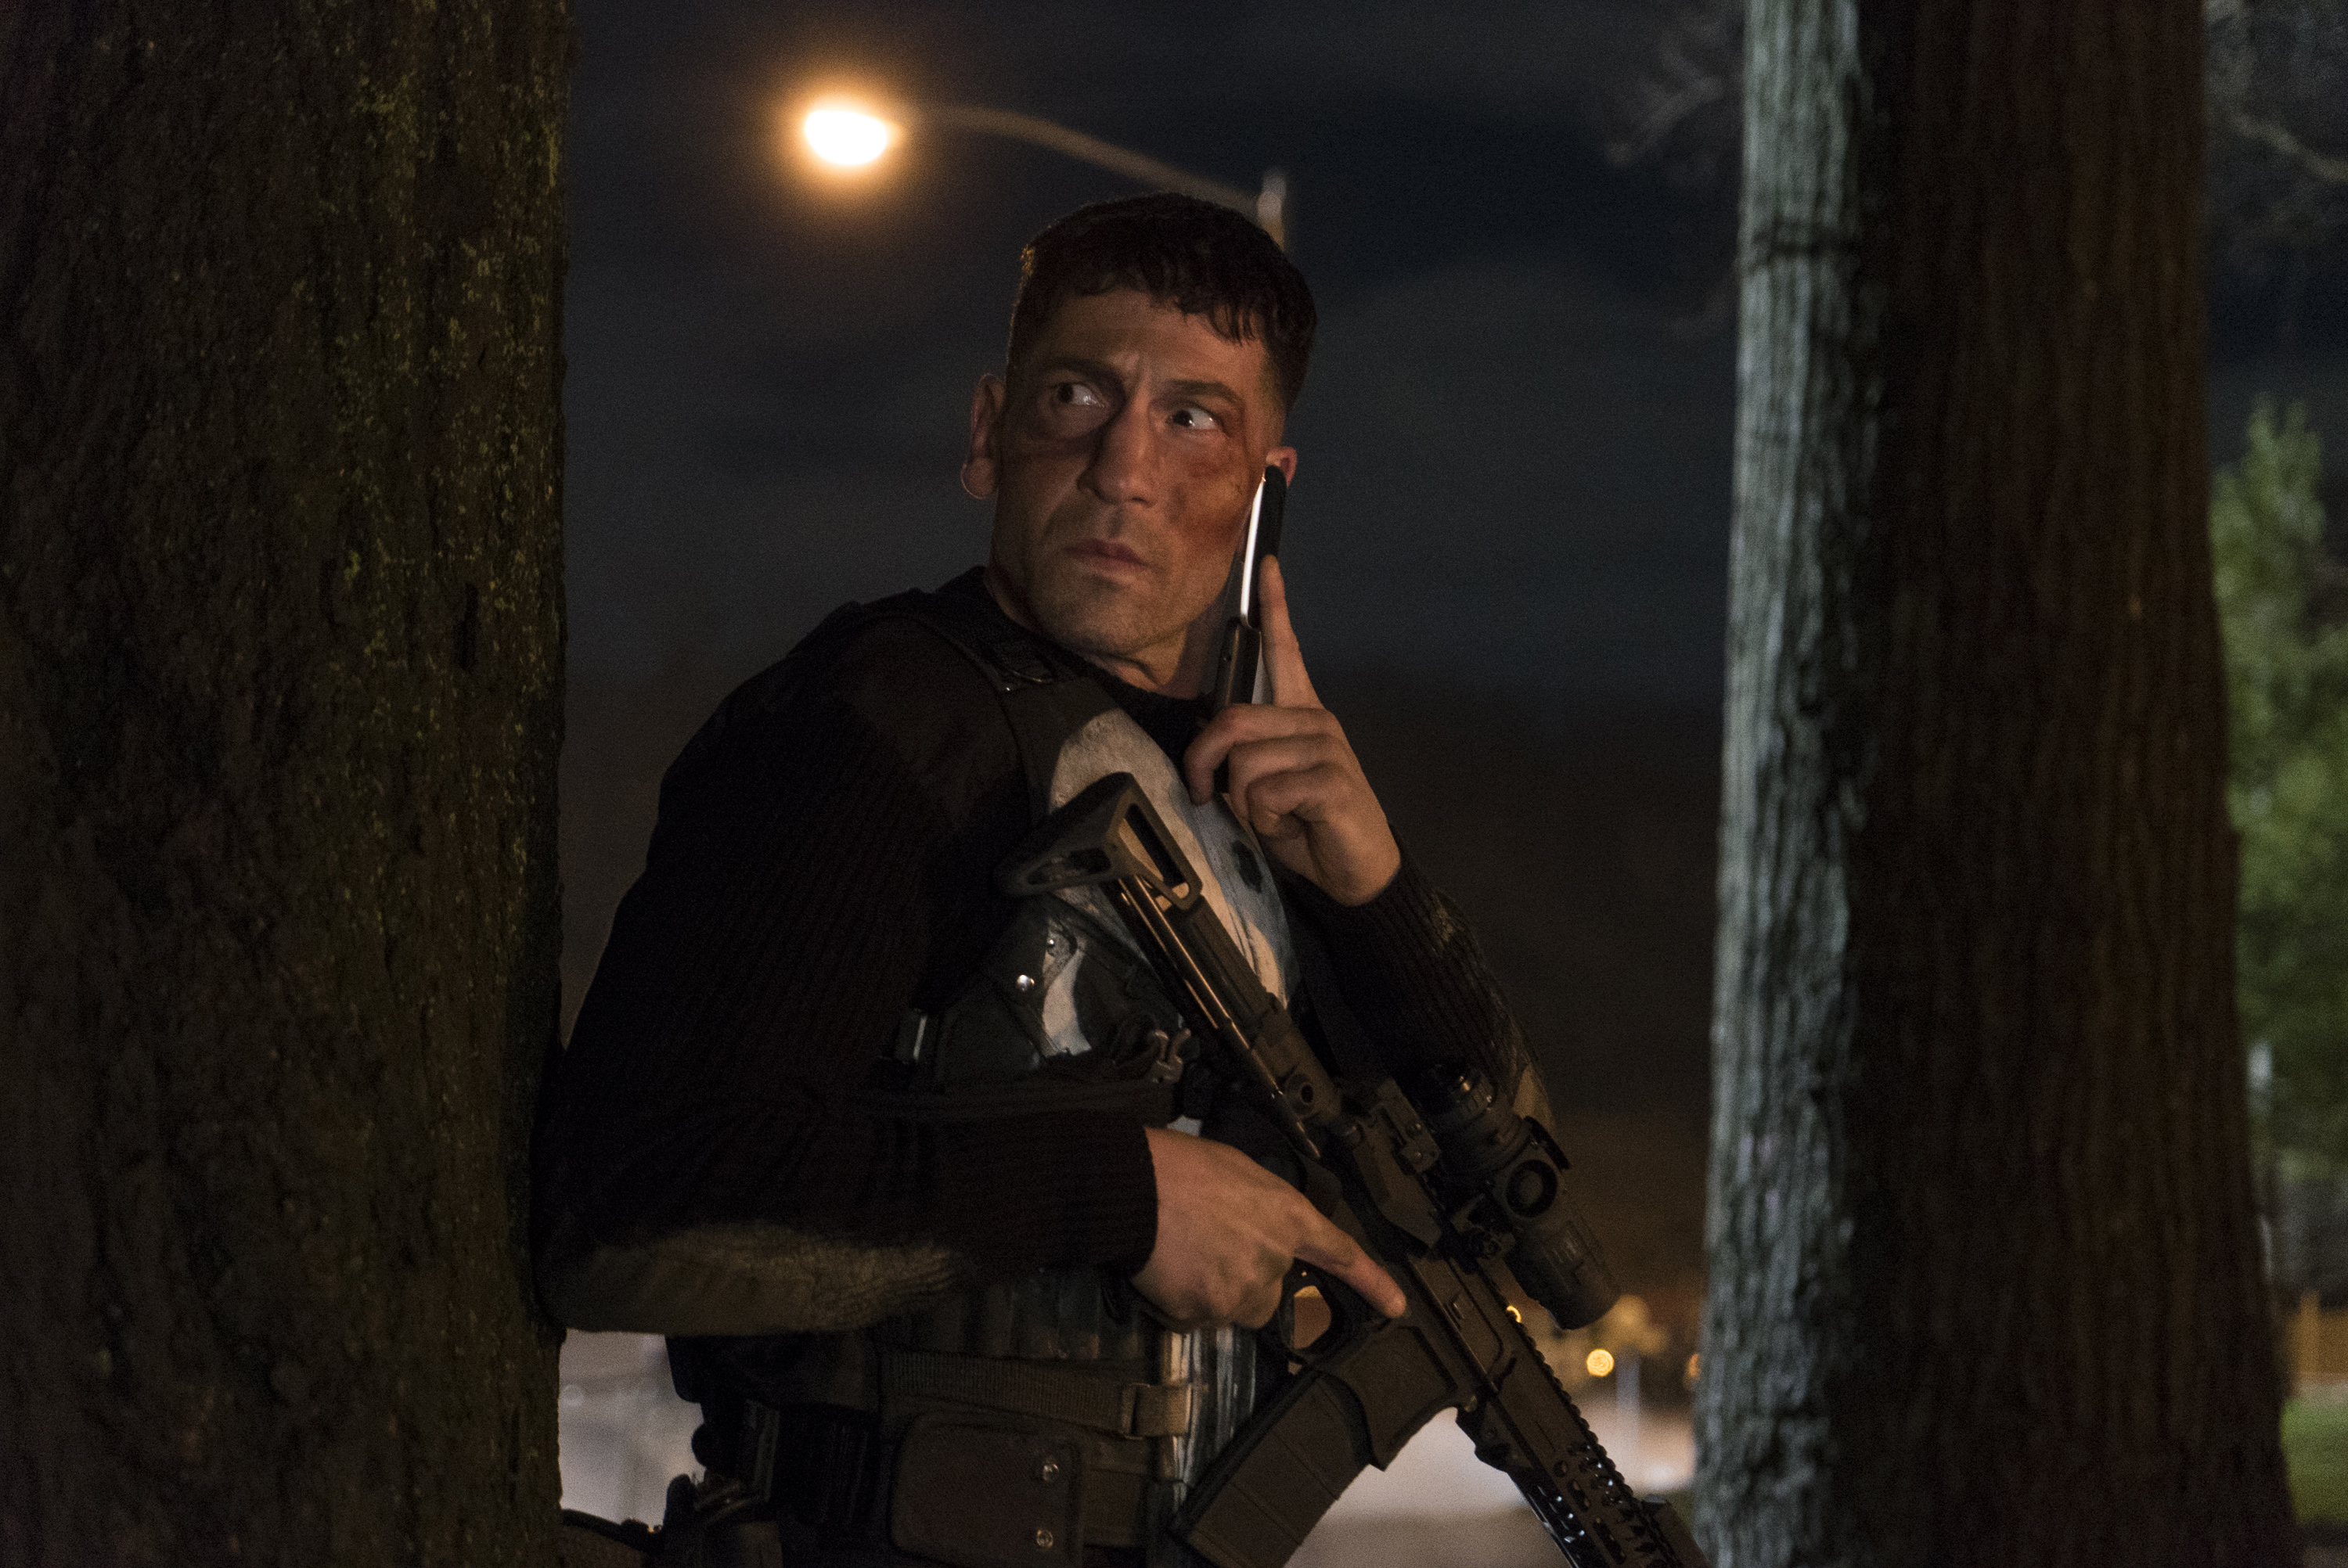 Punisher Central: PC POST #181: New Punisher fan film on the way!